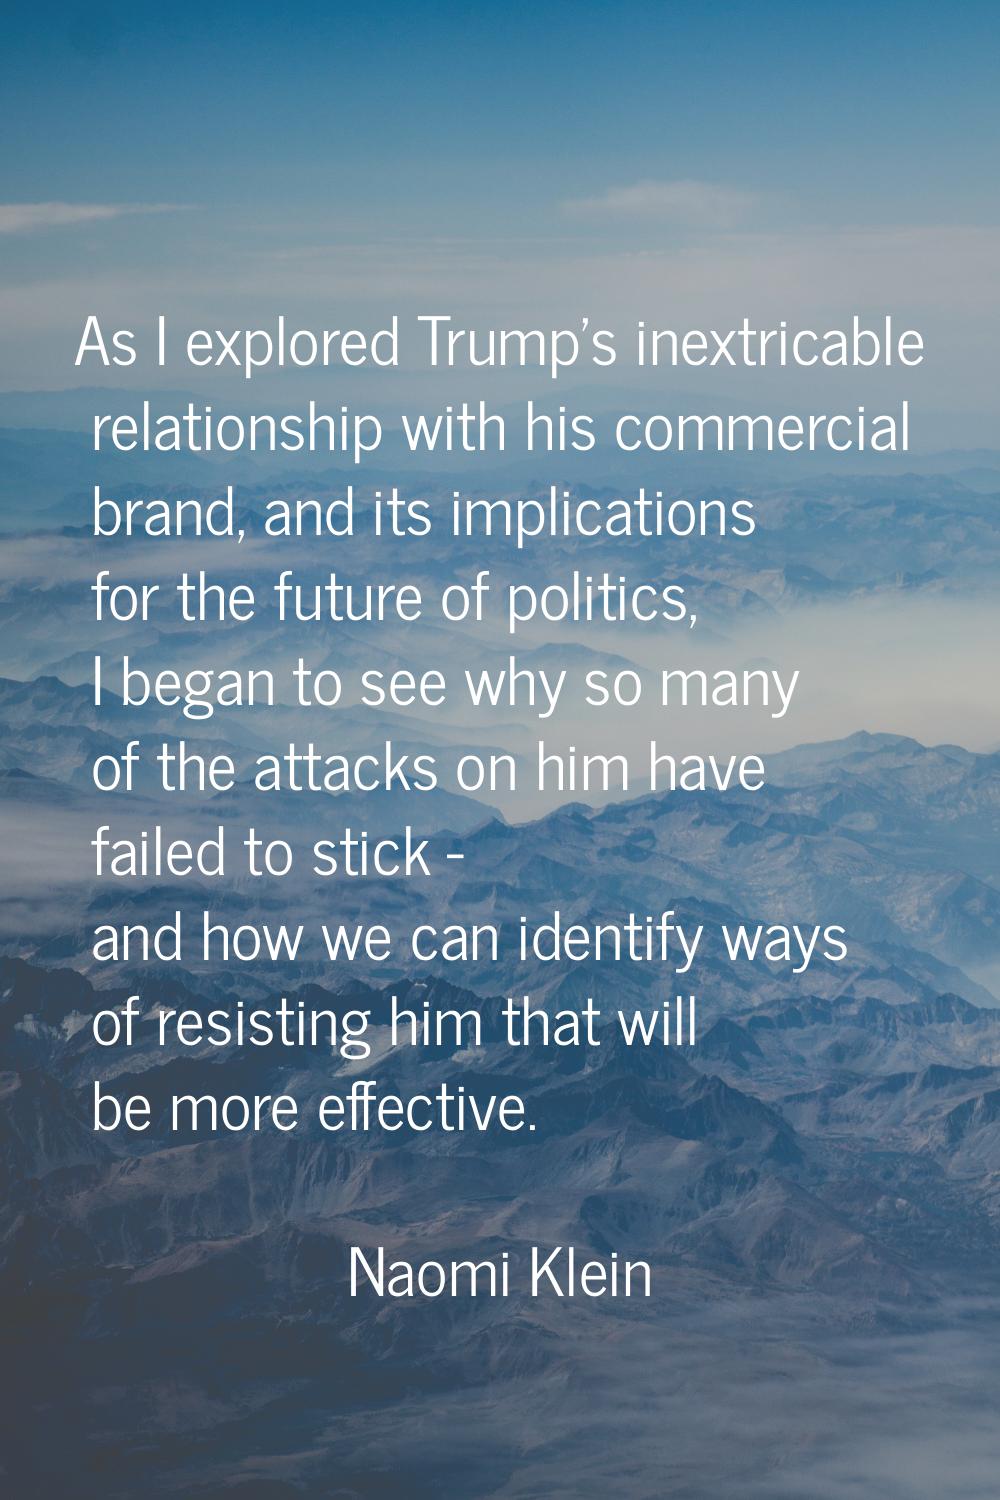 As I explored Trump's inextricable relationship with his commercial brand, and its implications for